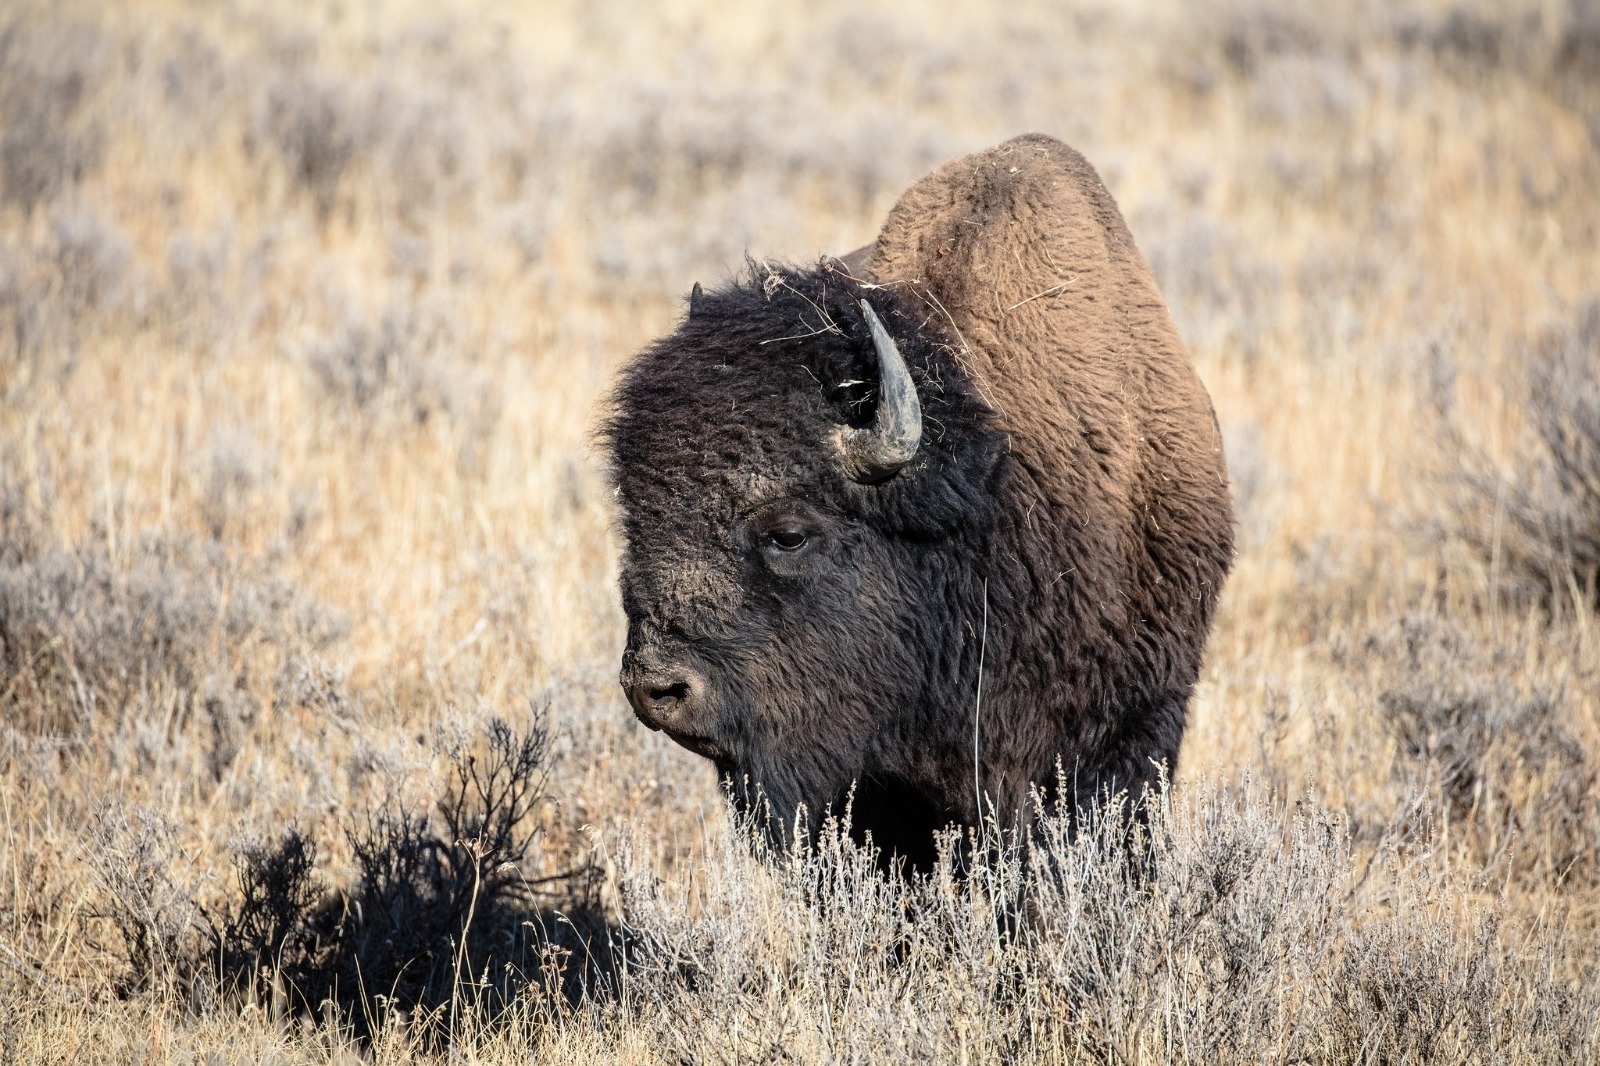 One of the significant issues Sholly faces is crafting a new management plan for Yellowstone bison, 11,000 of which have been shot or sent to slaughter upon entering Montana. Photo courtesy NPS